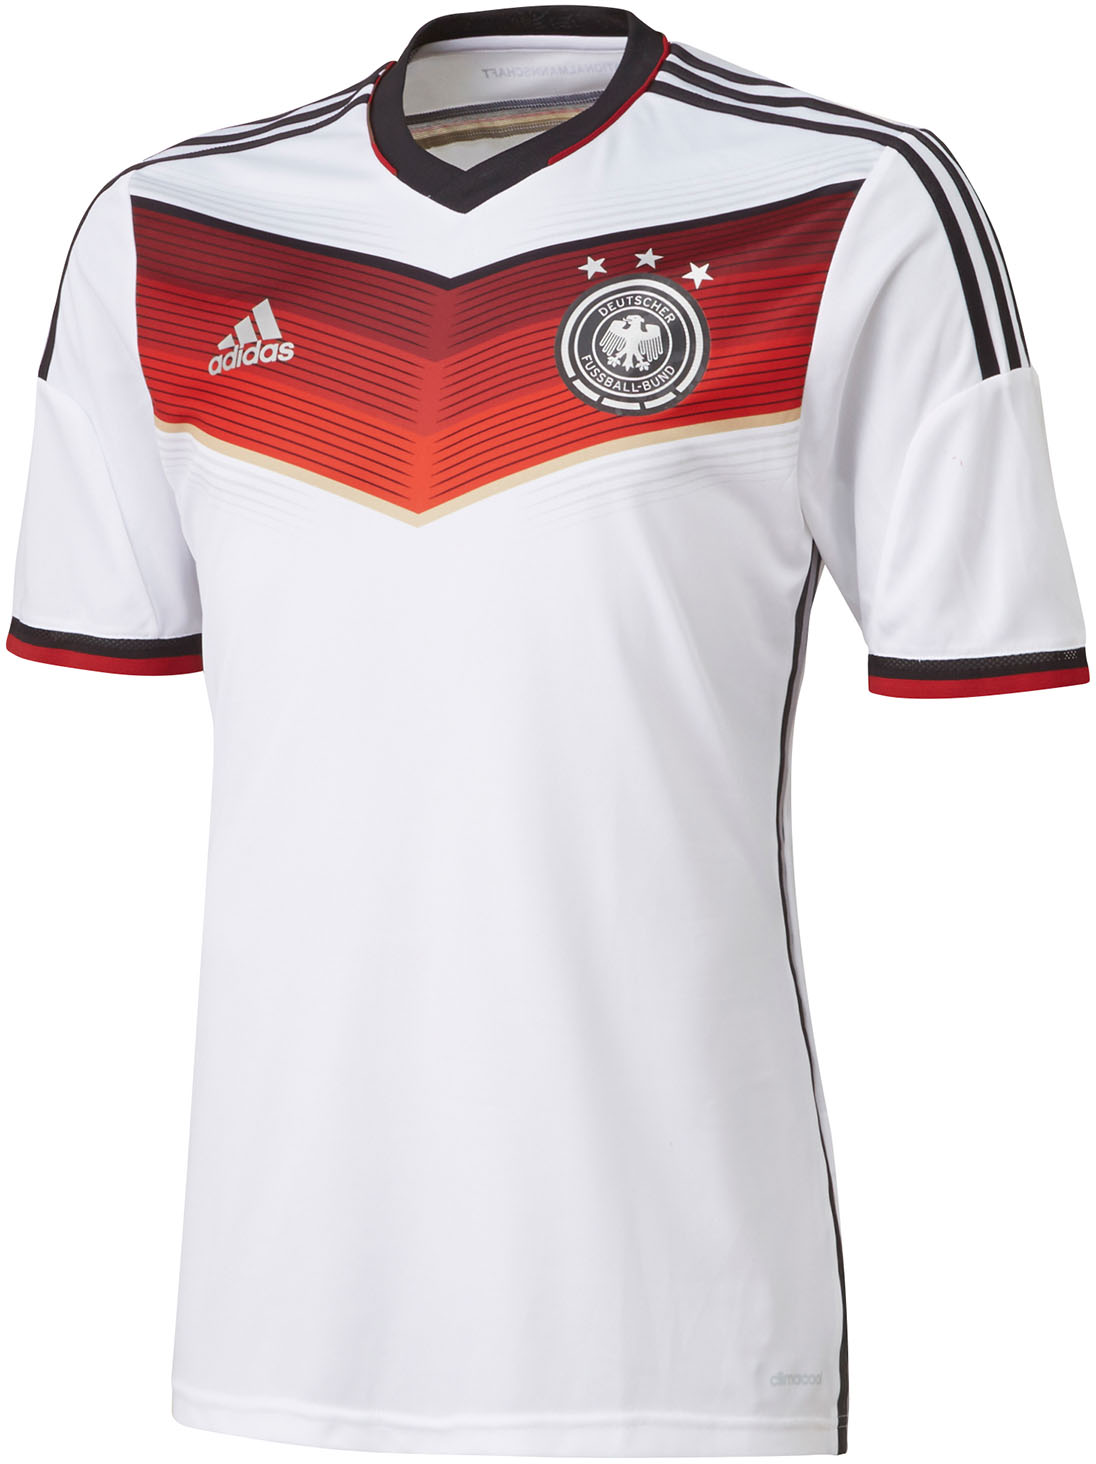 Germany 2014 FIFA World Cup Home Shorts